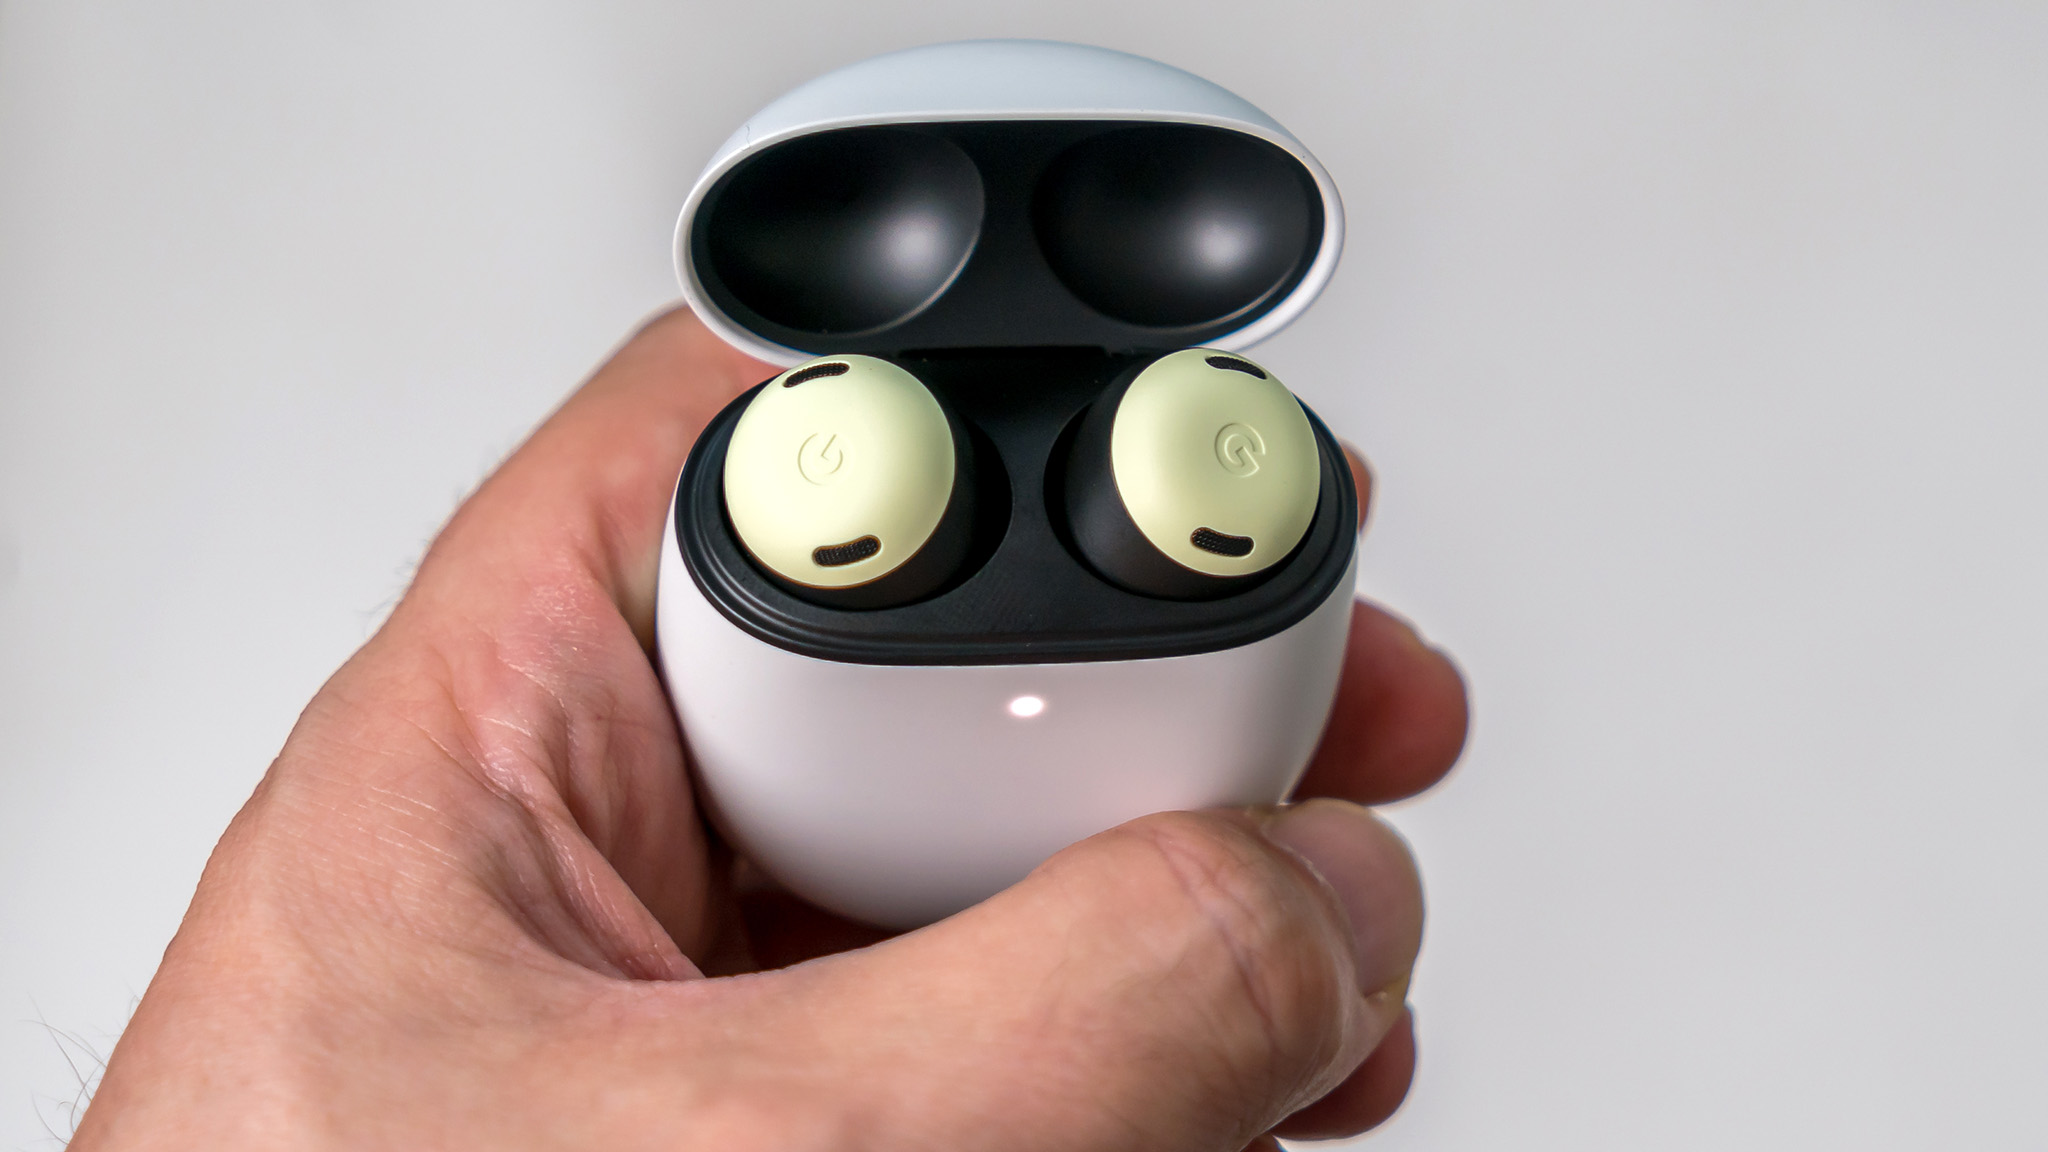 Download Google Pixel Buds Pro in their case